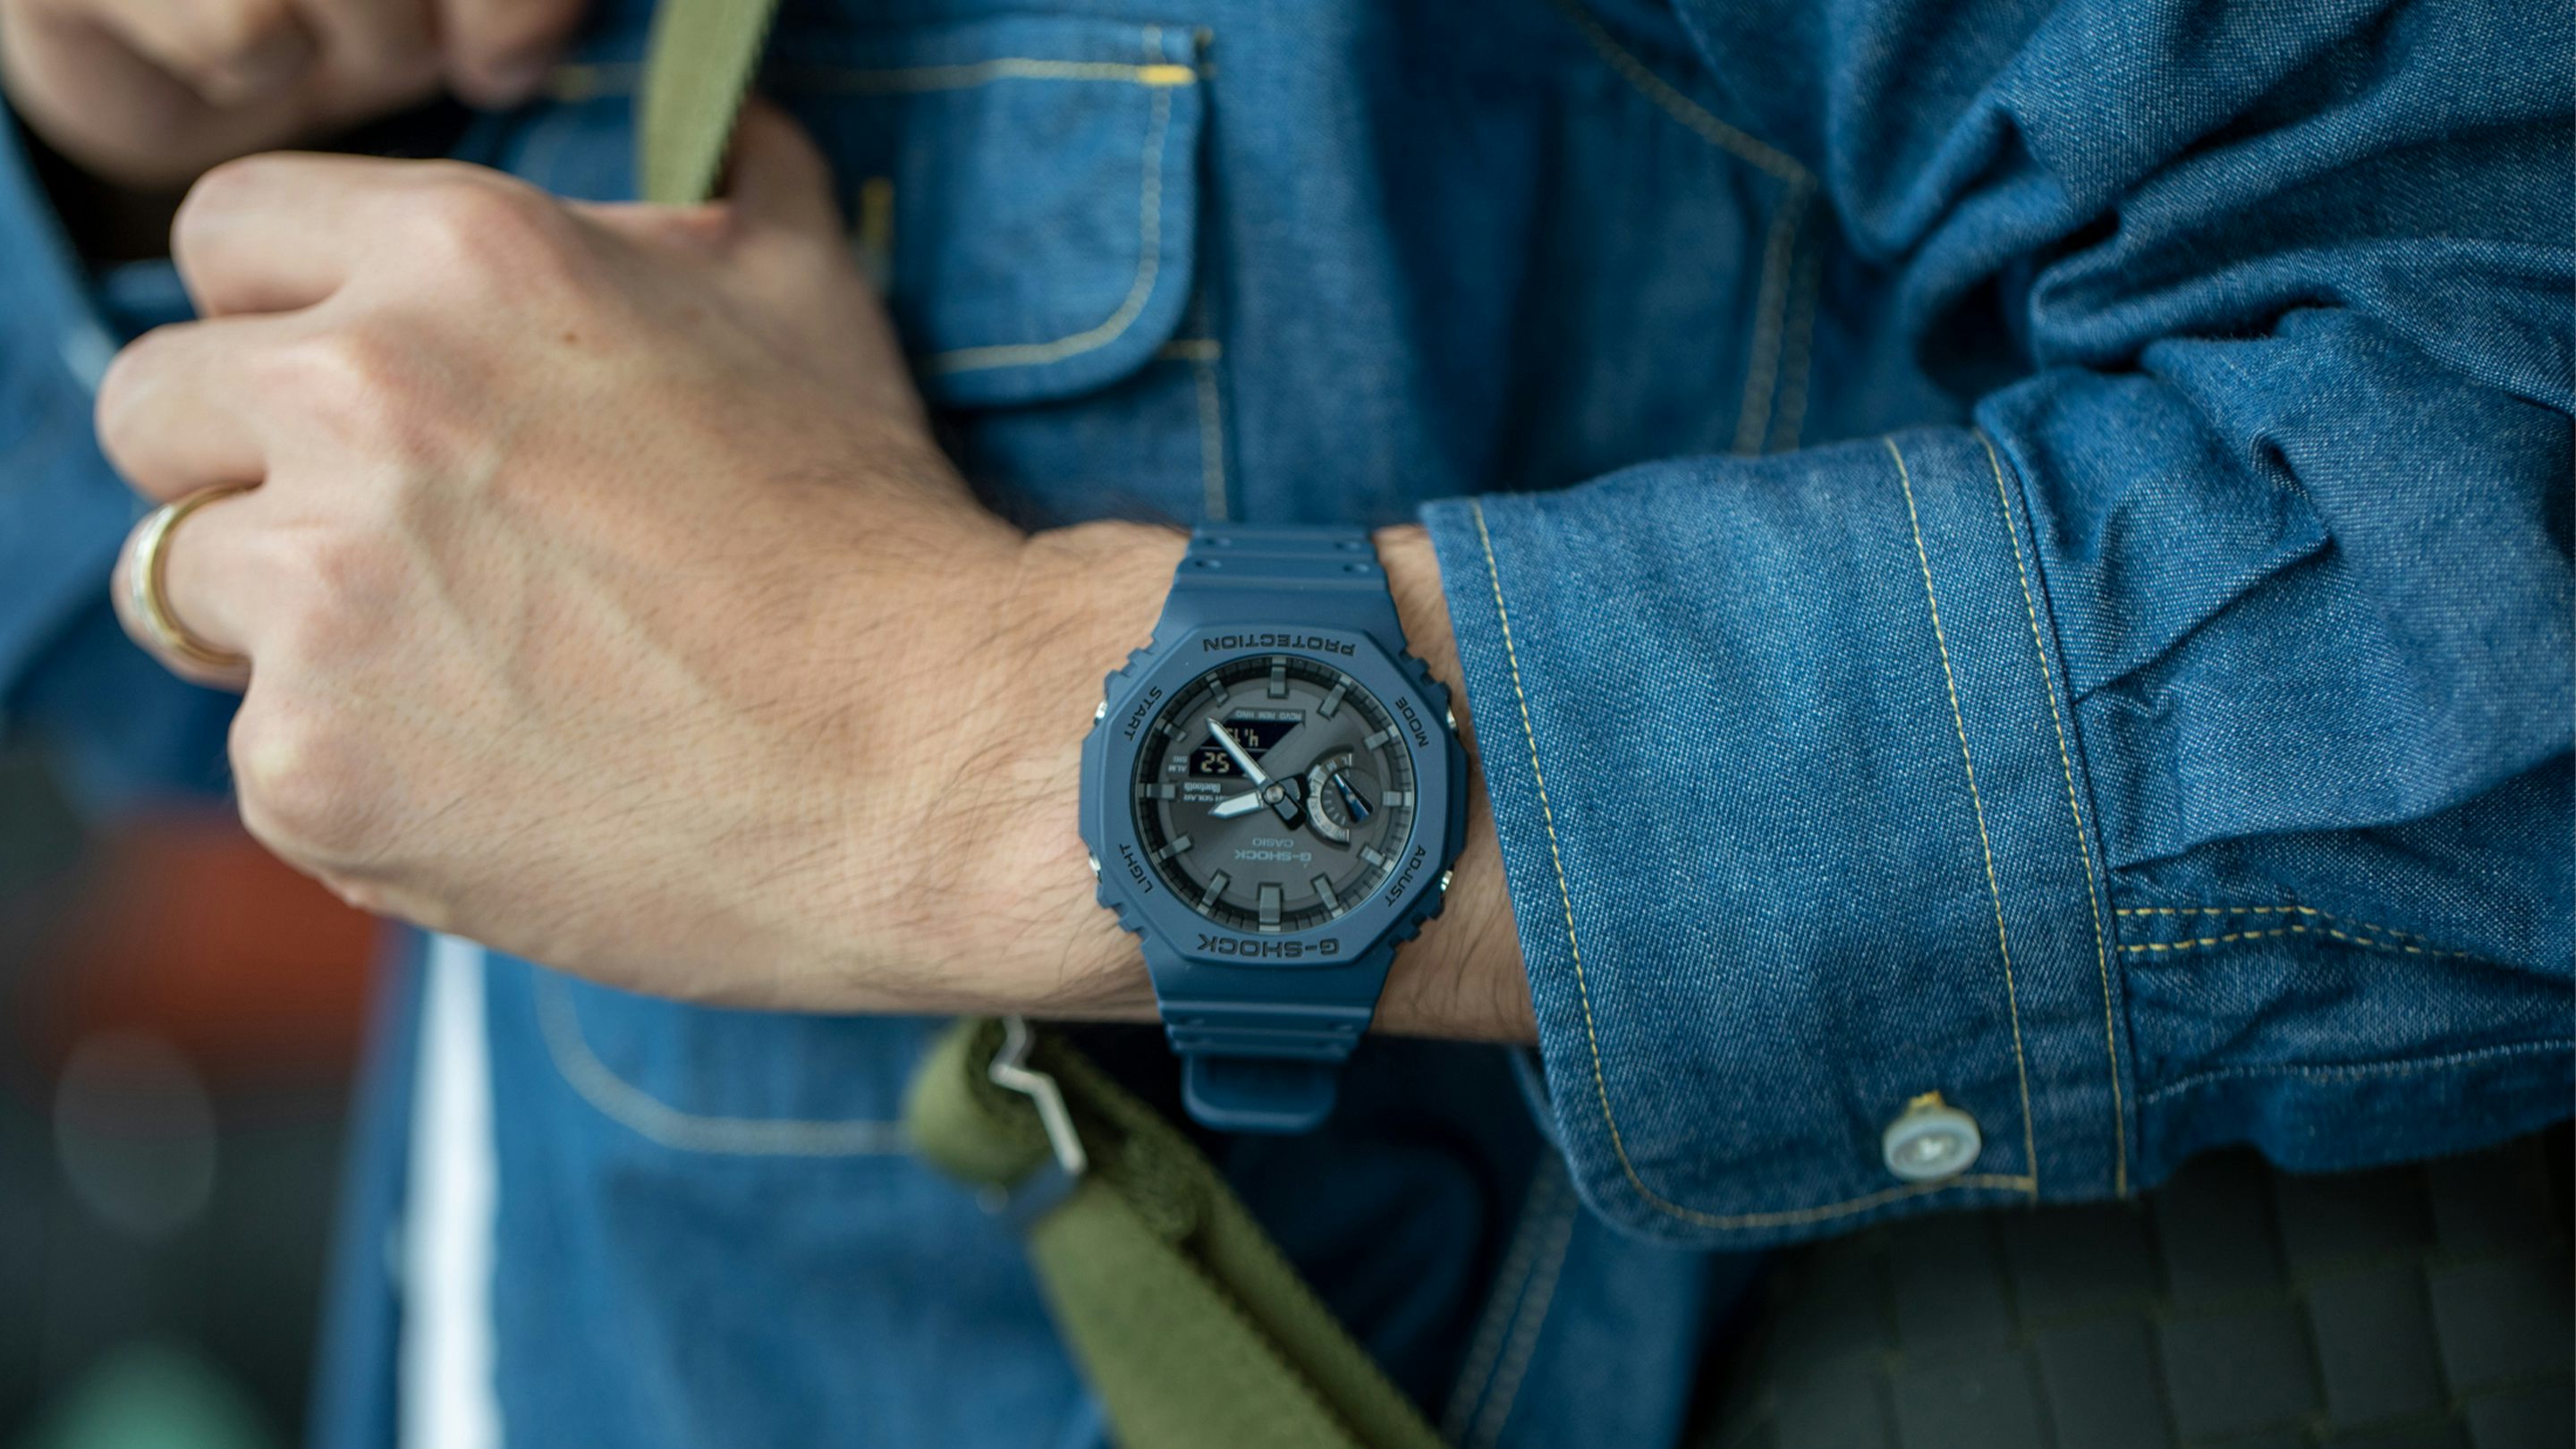 The new G-Shock GA-B2100 Adds The Design To CasiOak Serious Functionality